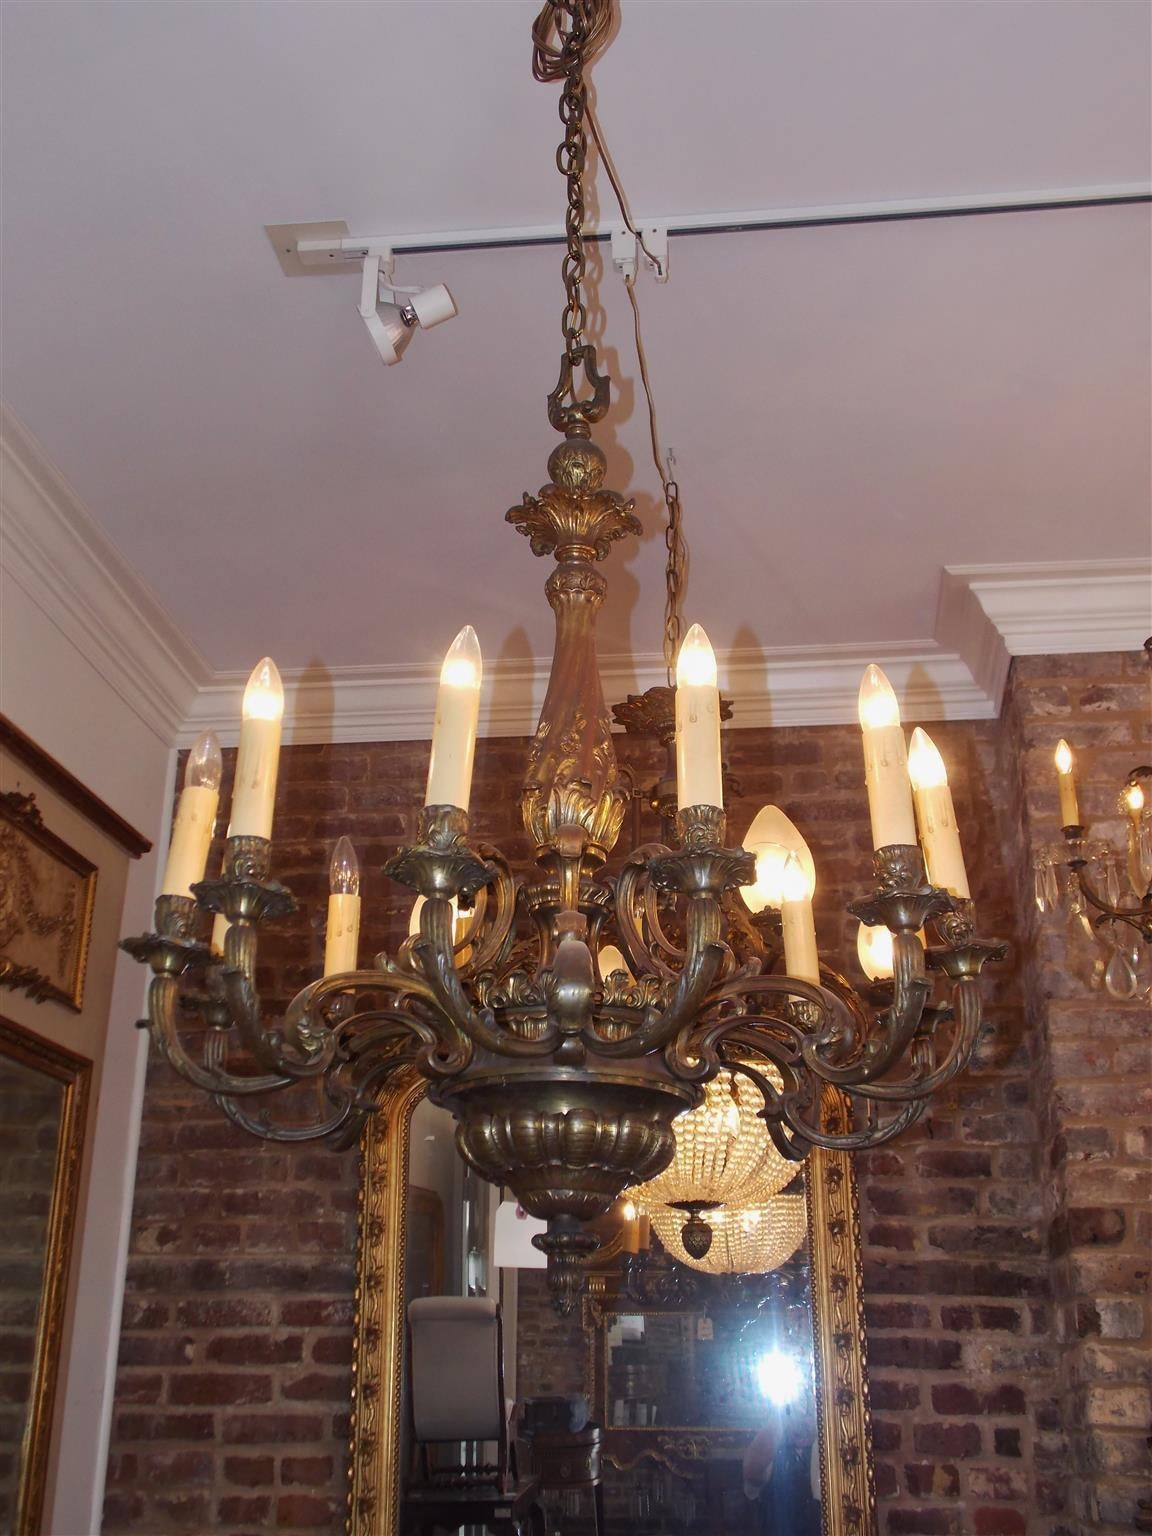 French gilt bronze twelve-light chandelier with centered bulbous decorative floral column, acanthus scrolled arms, terminating on circular gadrooned bulbous finial. Originally candle powered and has been electrified, Mid 19th century.